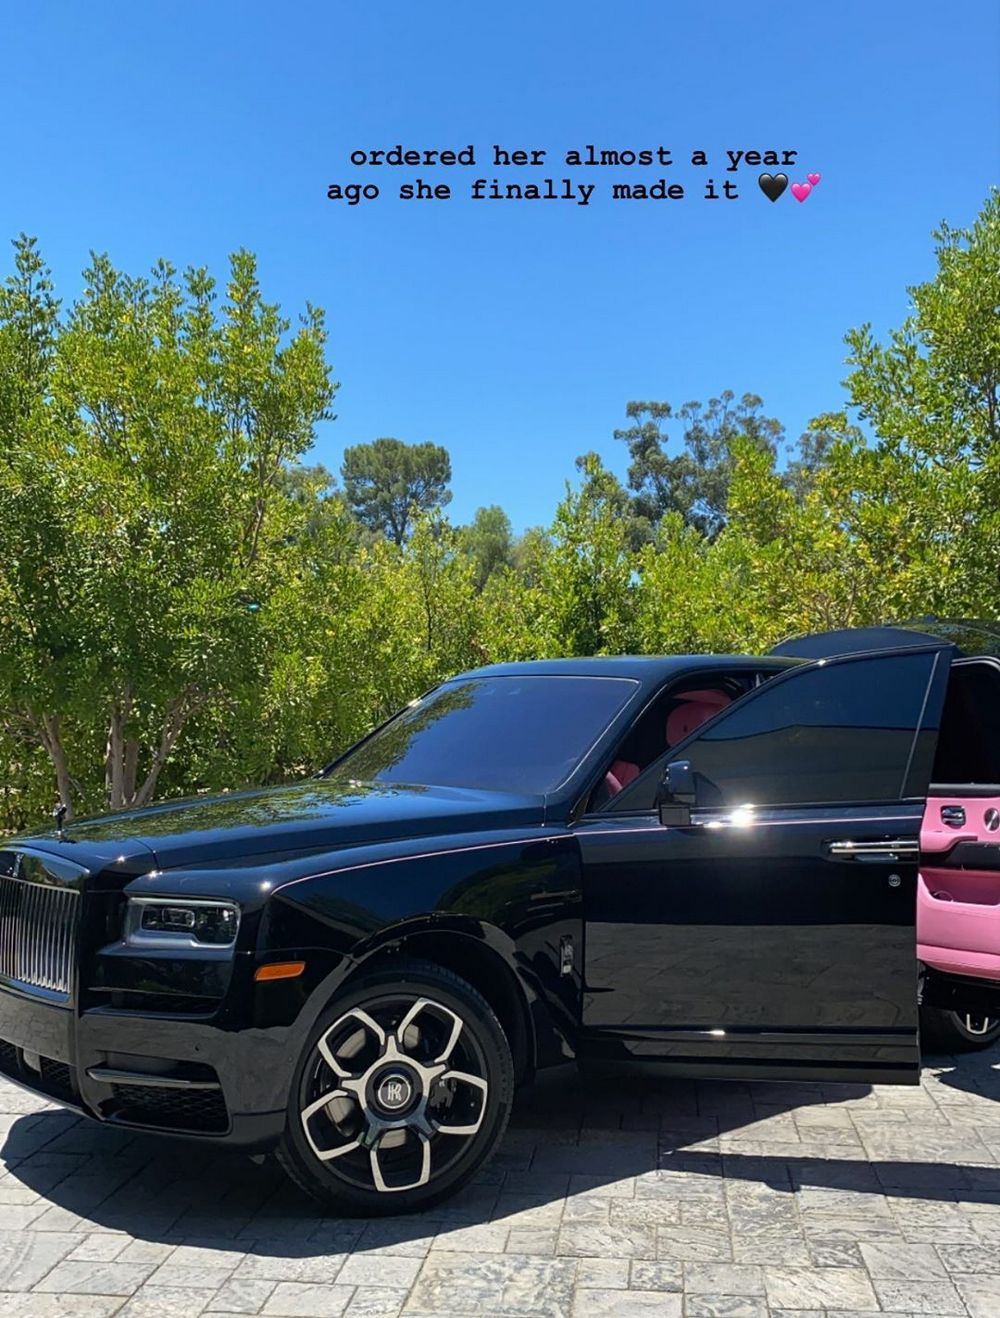 A look inside Kylie Jenner's $300k custom Rolls-Royce SUV that is so pink  it will remind you of Barbie's dream house - Luxurylaunches